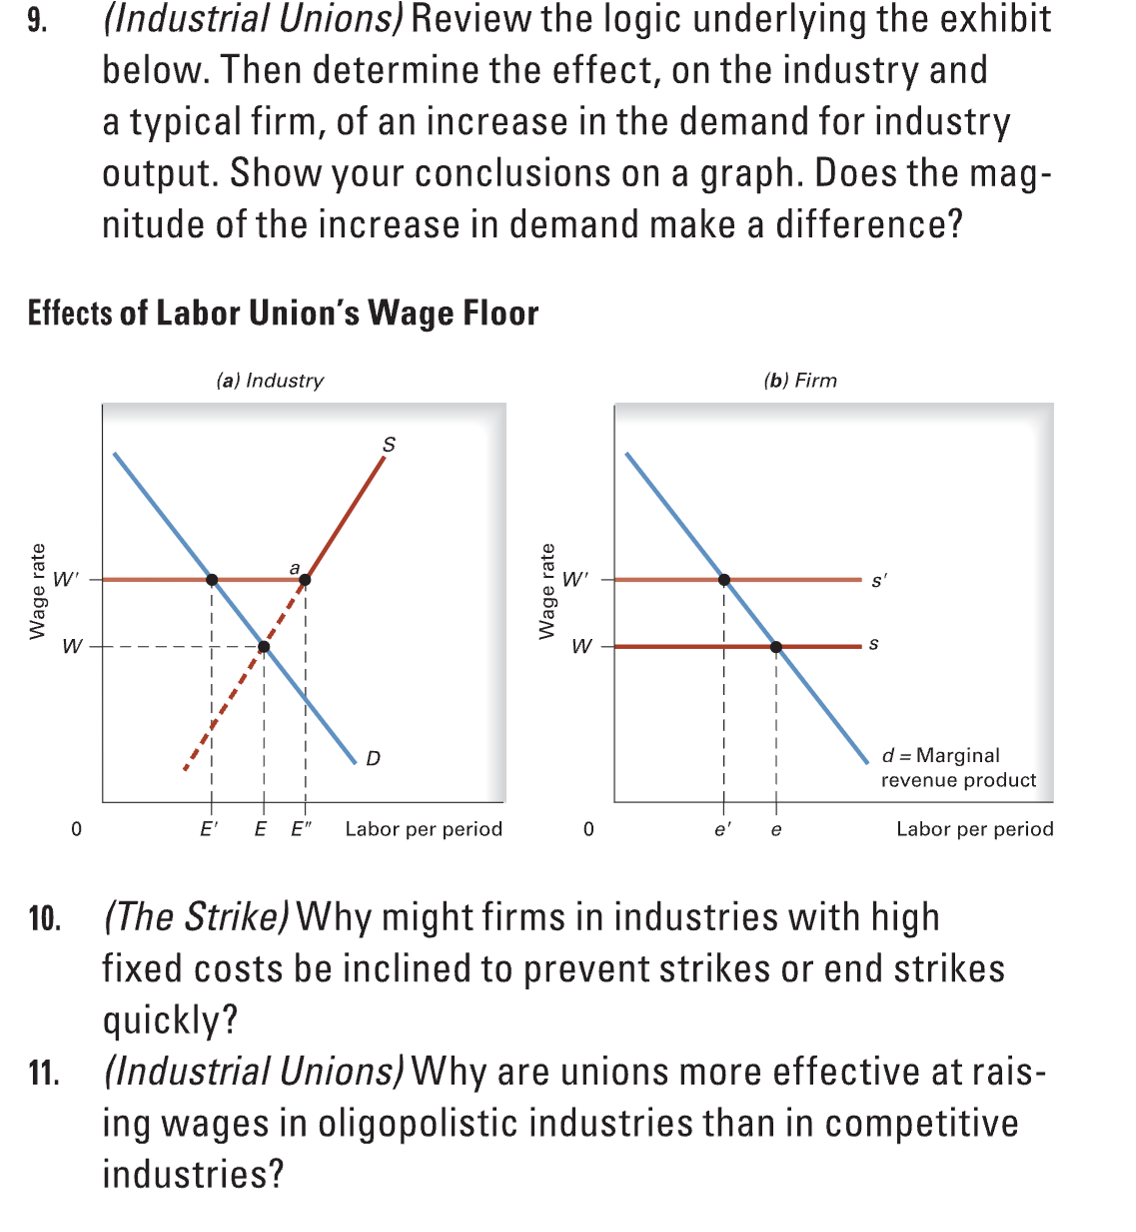 10. (The Strike) Why might firms in industries with high
fixed costs be inclined to prevent strikes or end strikes
quickly?
